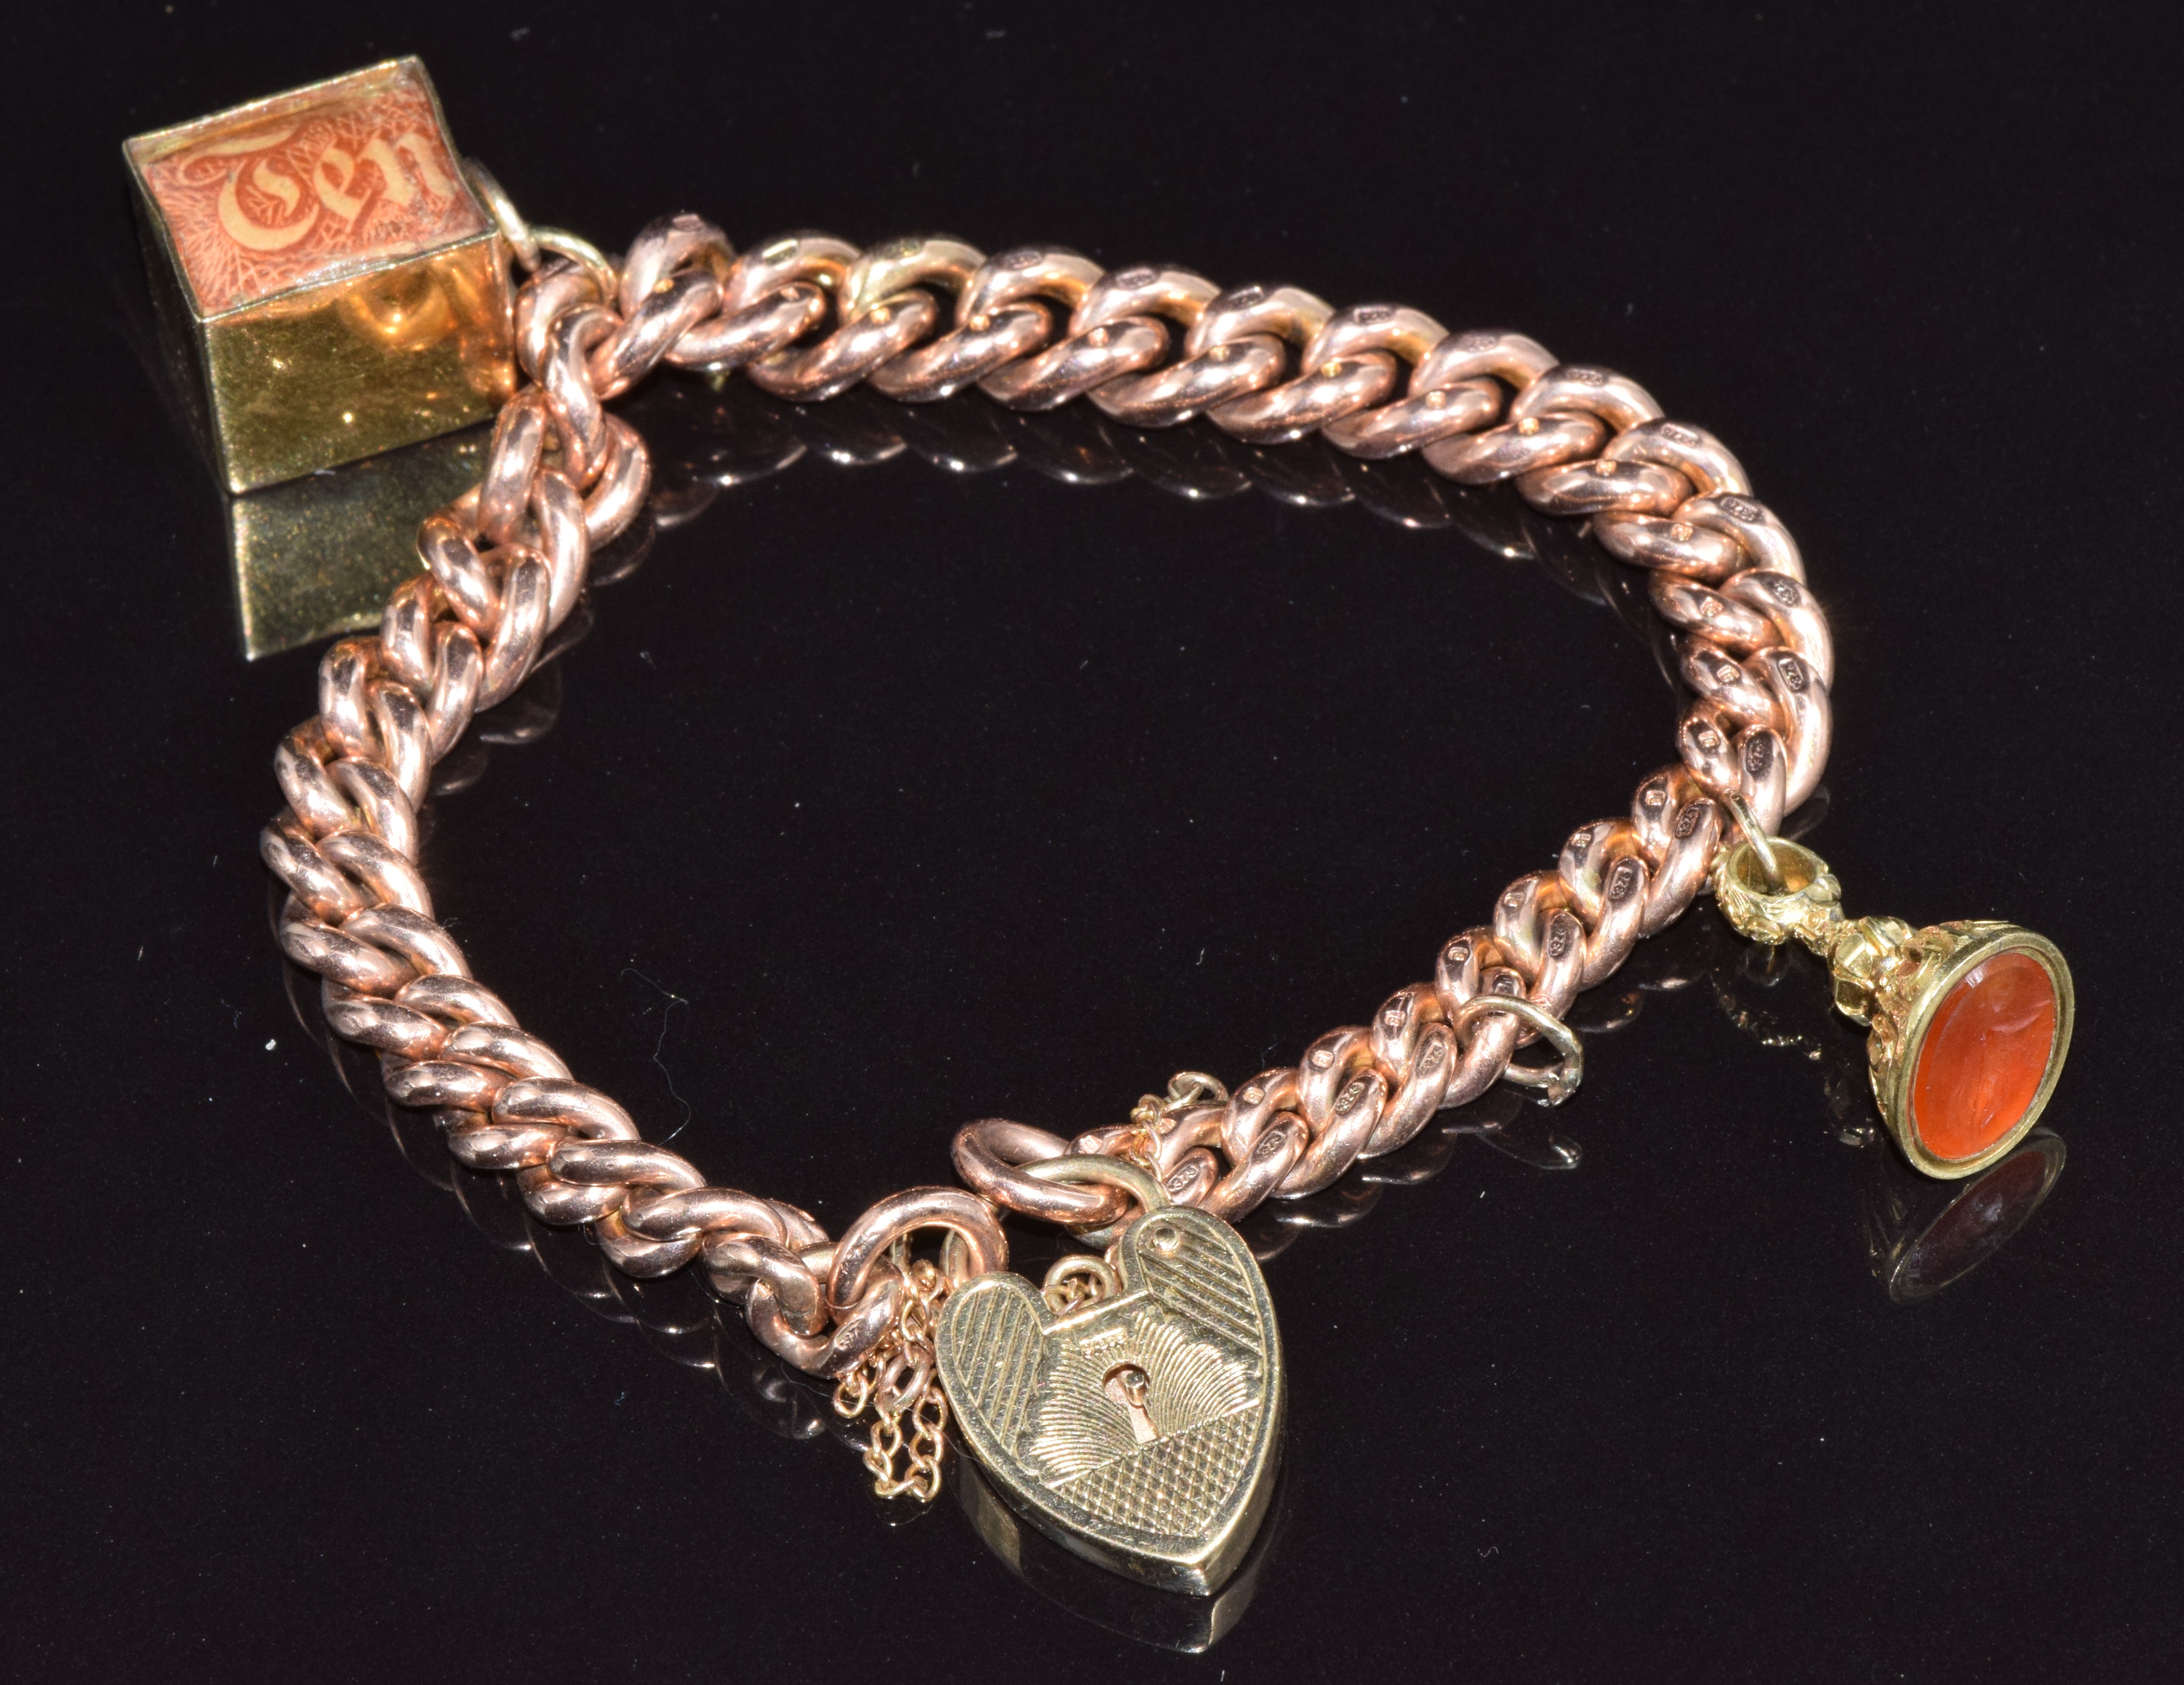 A 9ct rose gold bracelet with a 9ct gold ten shilling note charm and a Victorian fob set with agate,